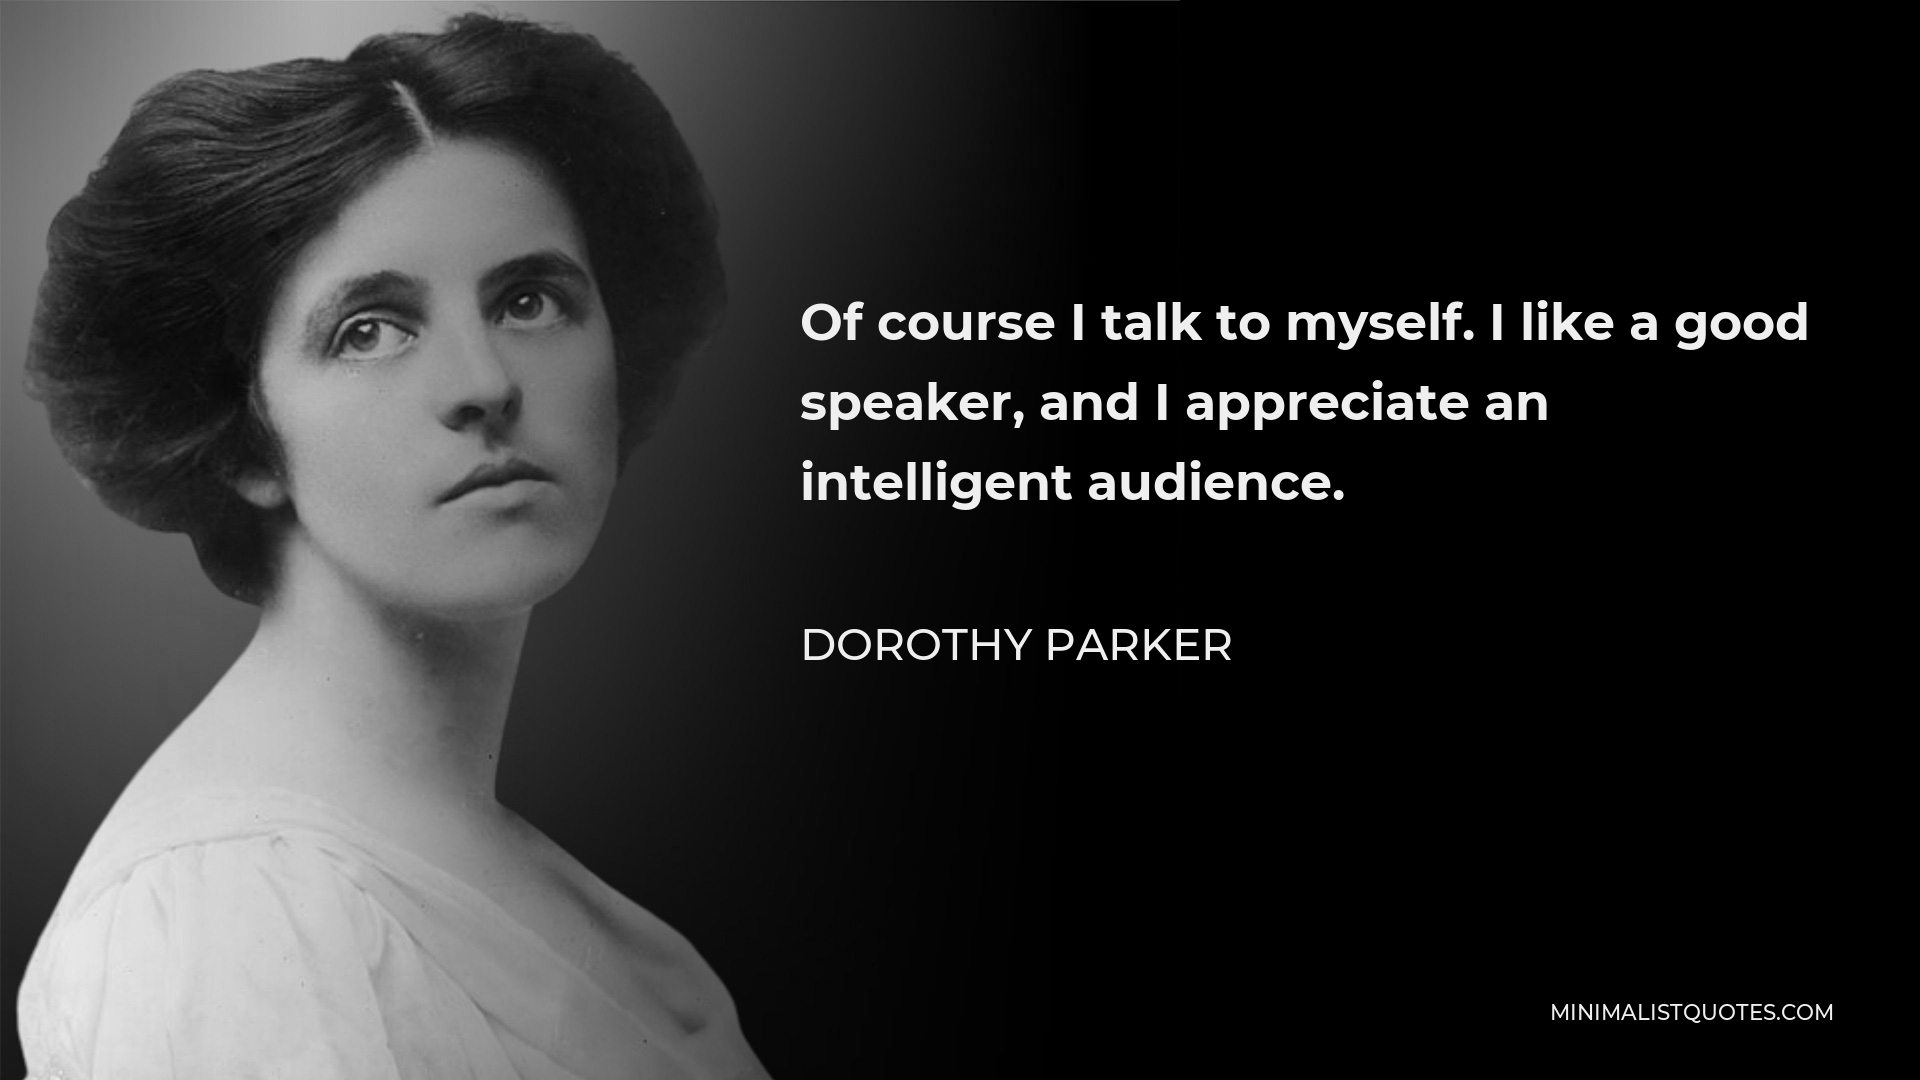 Dorothy Parker Quote - Of course I talk to myself. I like a good speaker, and I appreciate an intelligent audience.